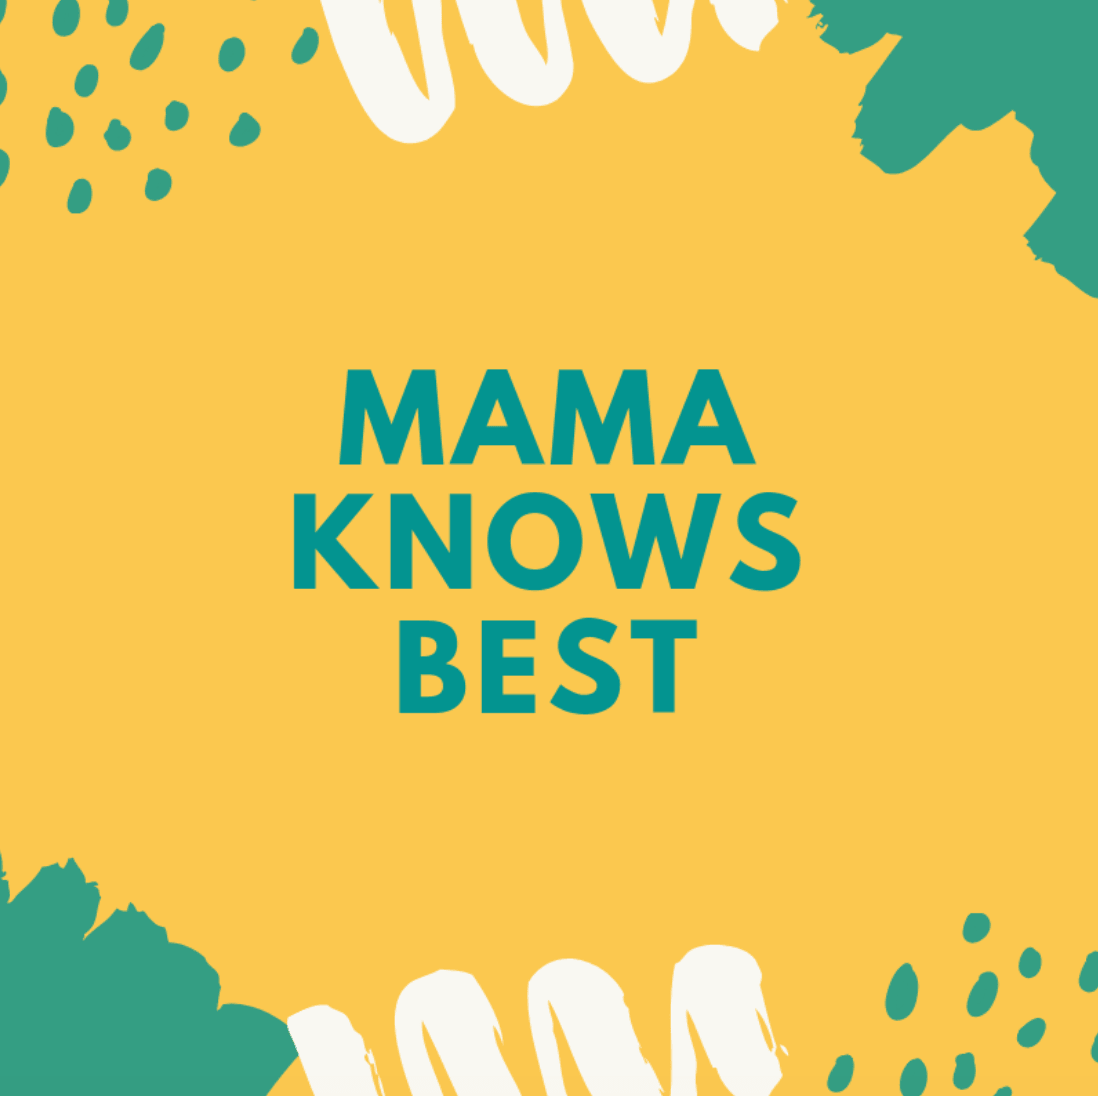 Mama know's best - In The Lab